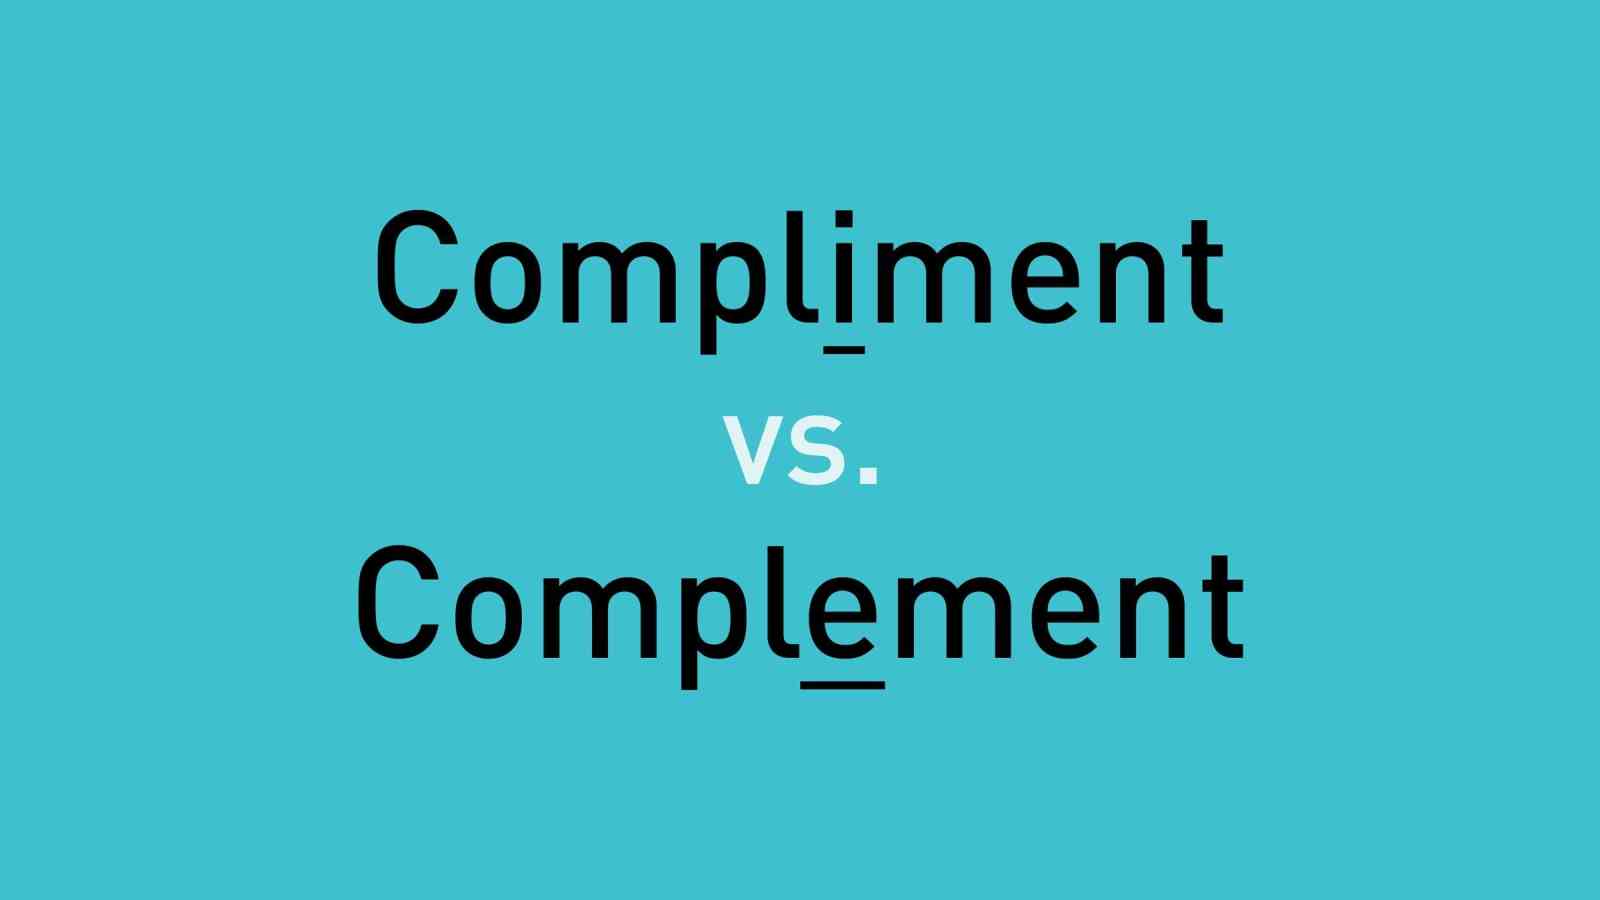 Compliment vs Complement: Difference between Compliment and Complement